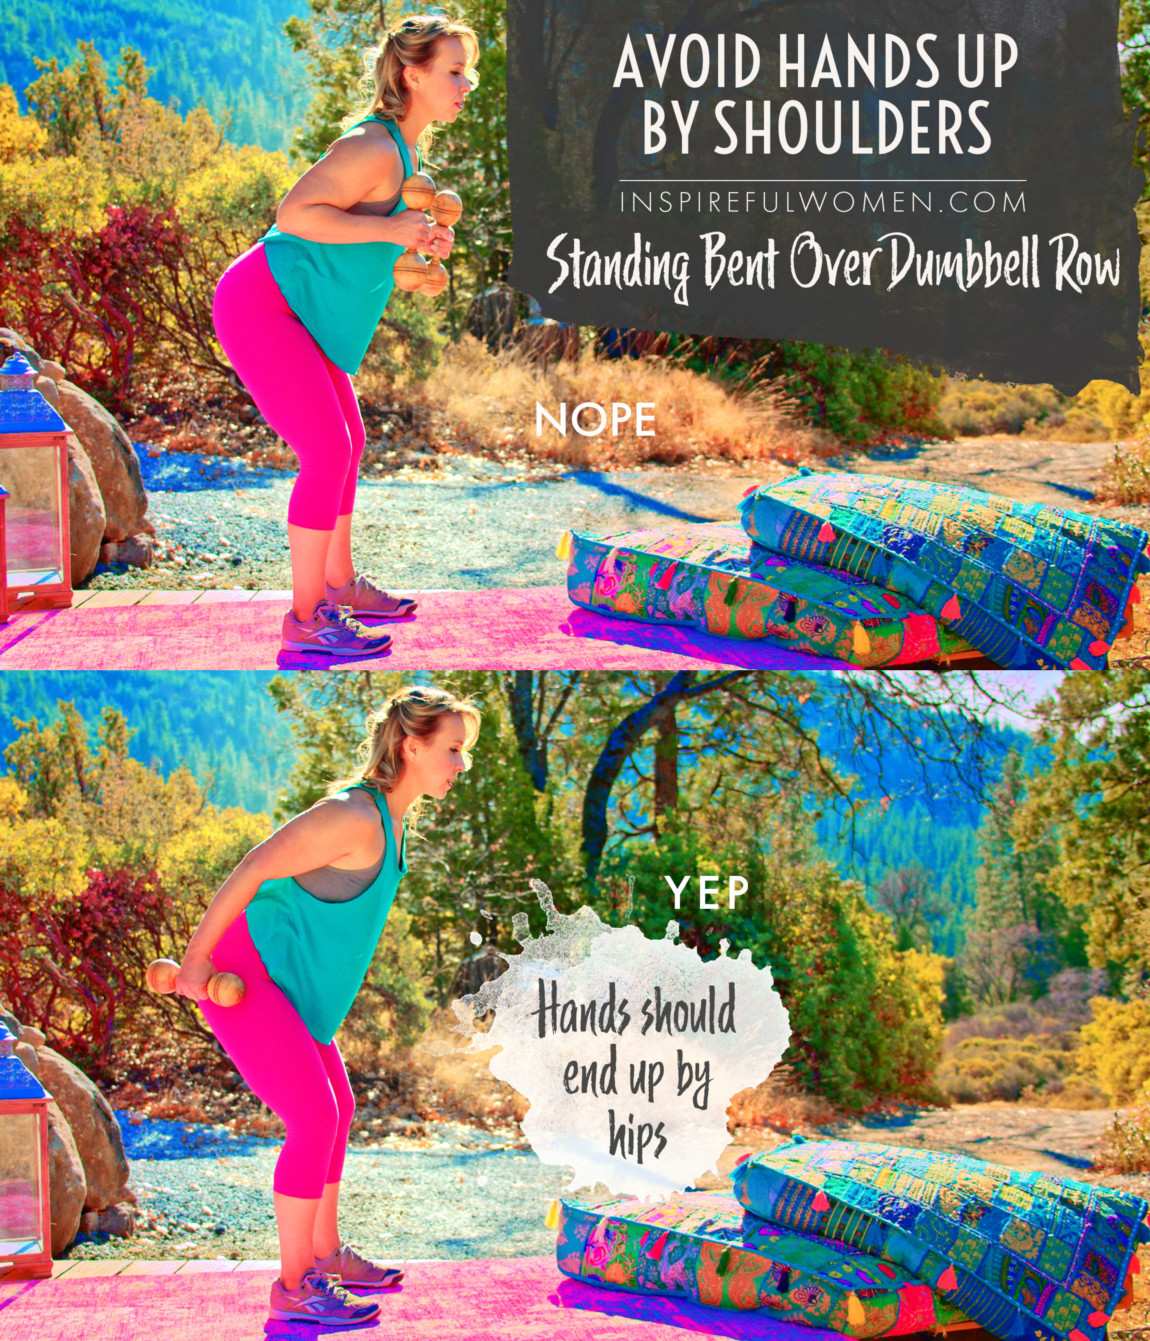 avoid-hands-up-by-shoulders-two-arm-dumbbell-row-standing-exercise-proper-form